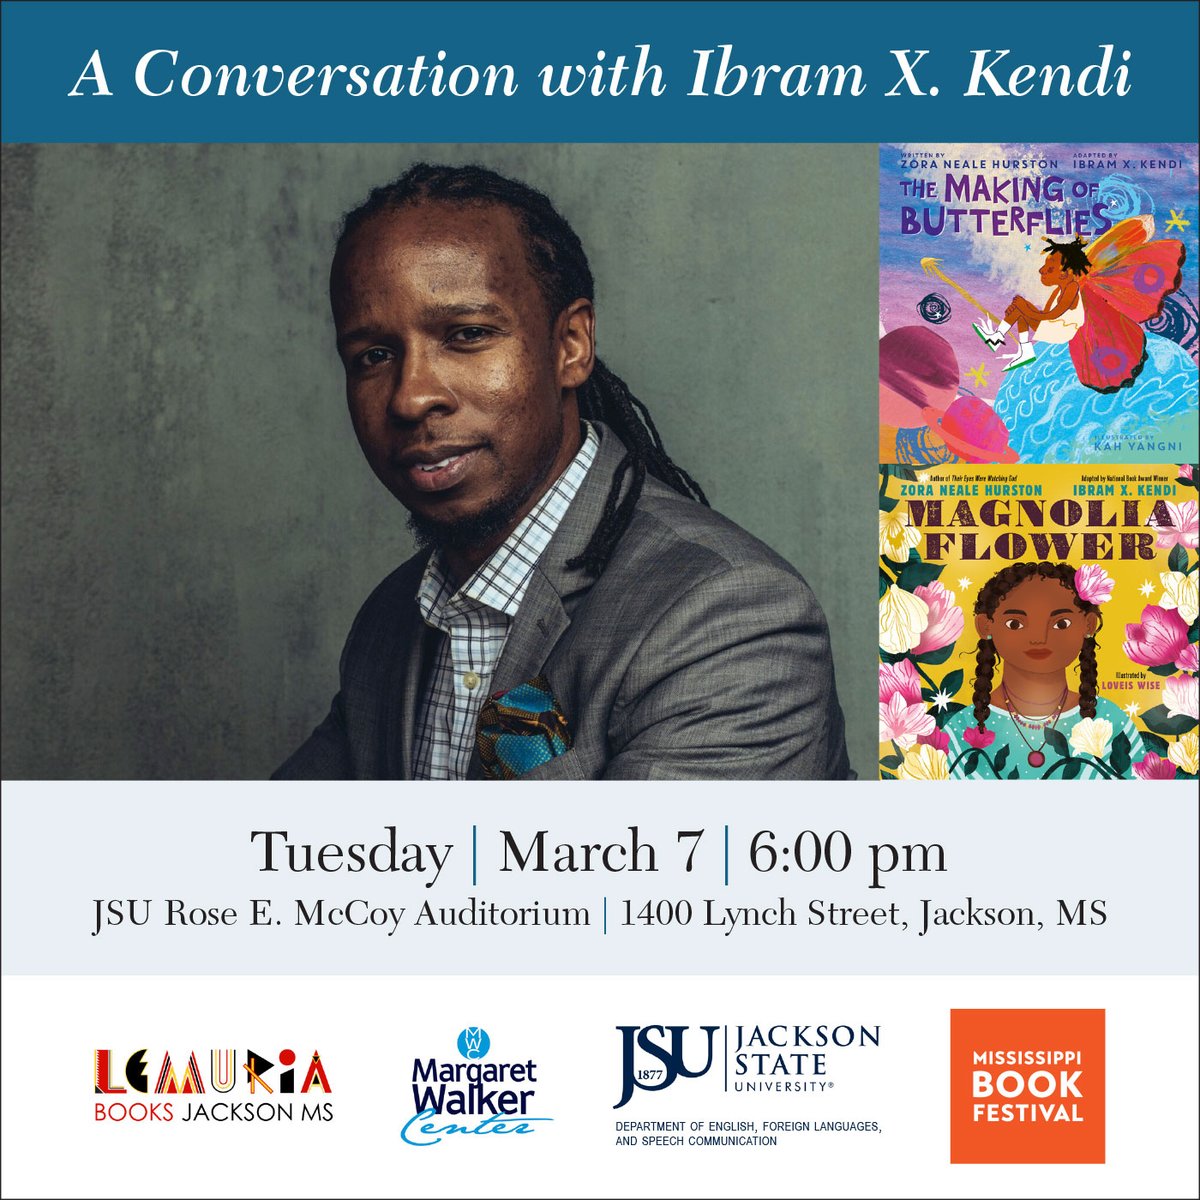 Don't miss this event! We're partnering with @LemuriaBooks, @MWalkerCenter, + @JacksonStateU's Dept. of English, Foreign Languages and Speech Comm. for an event with @DrIbram. He'll be in conversation with Mississippi Book Festival board member Ebony Lumumba! (1/3)